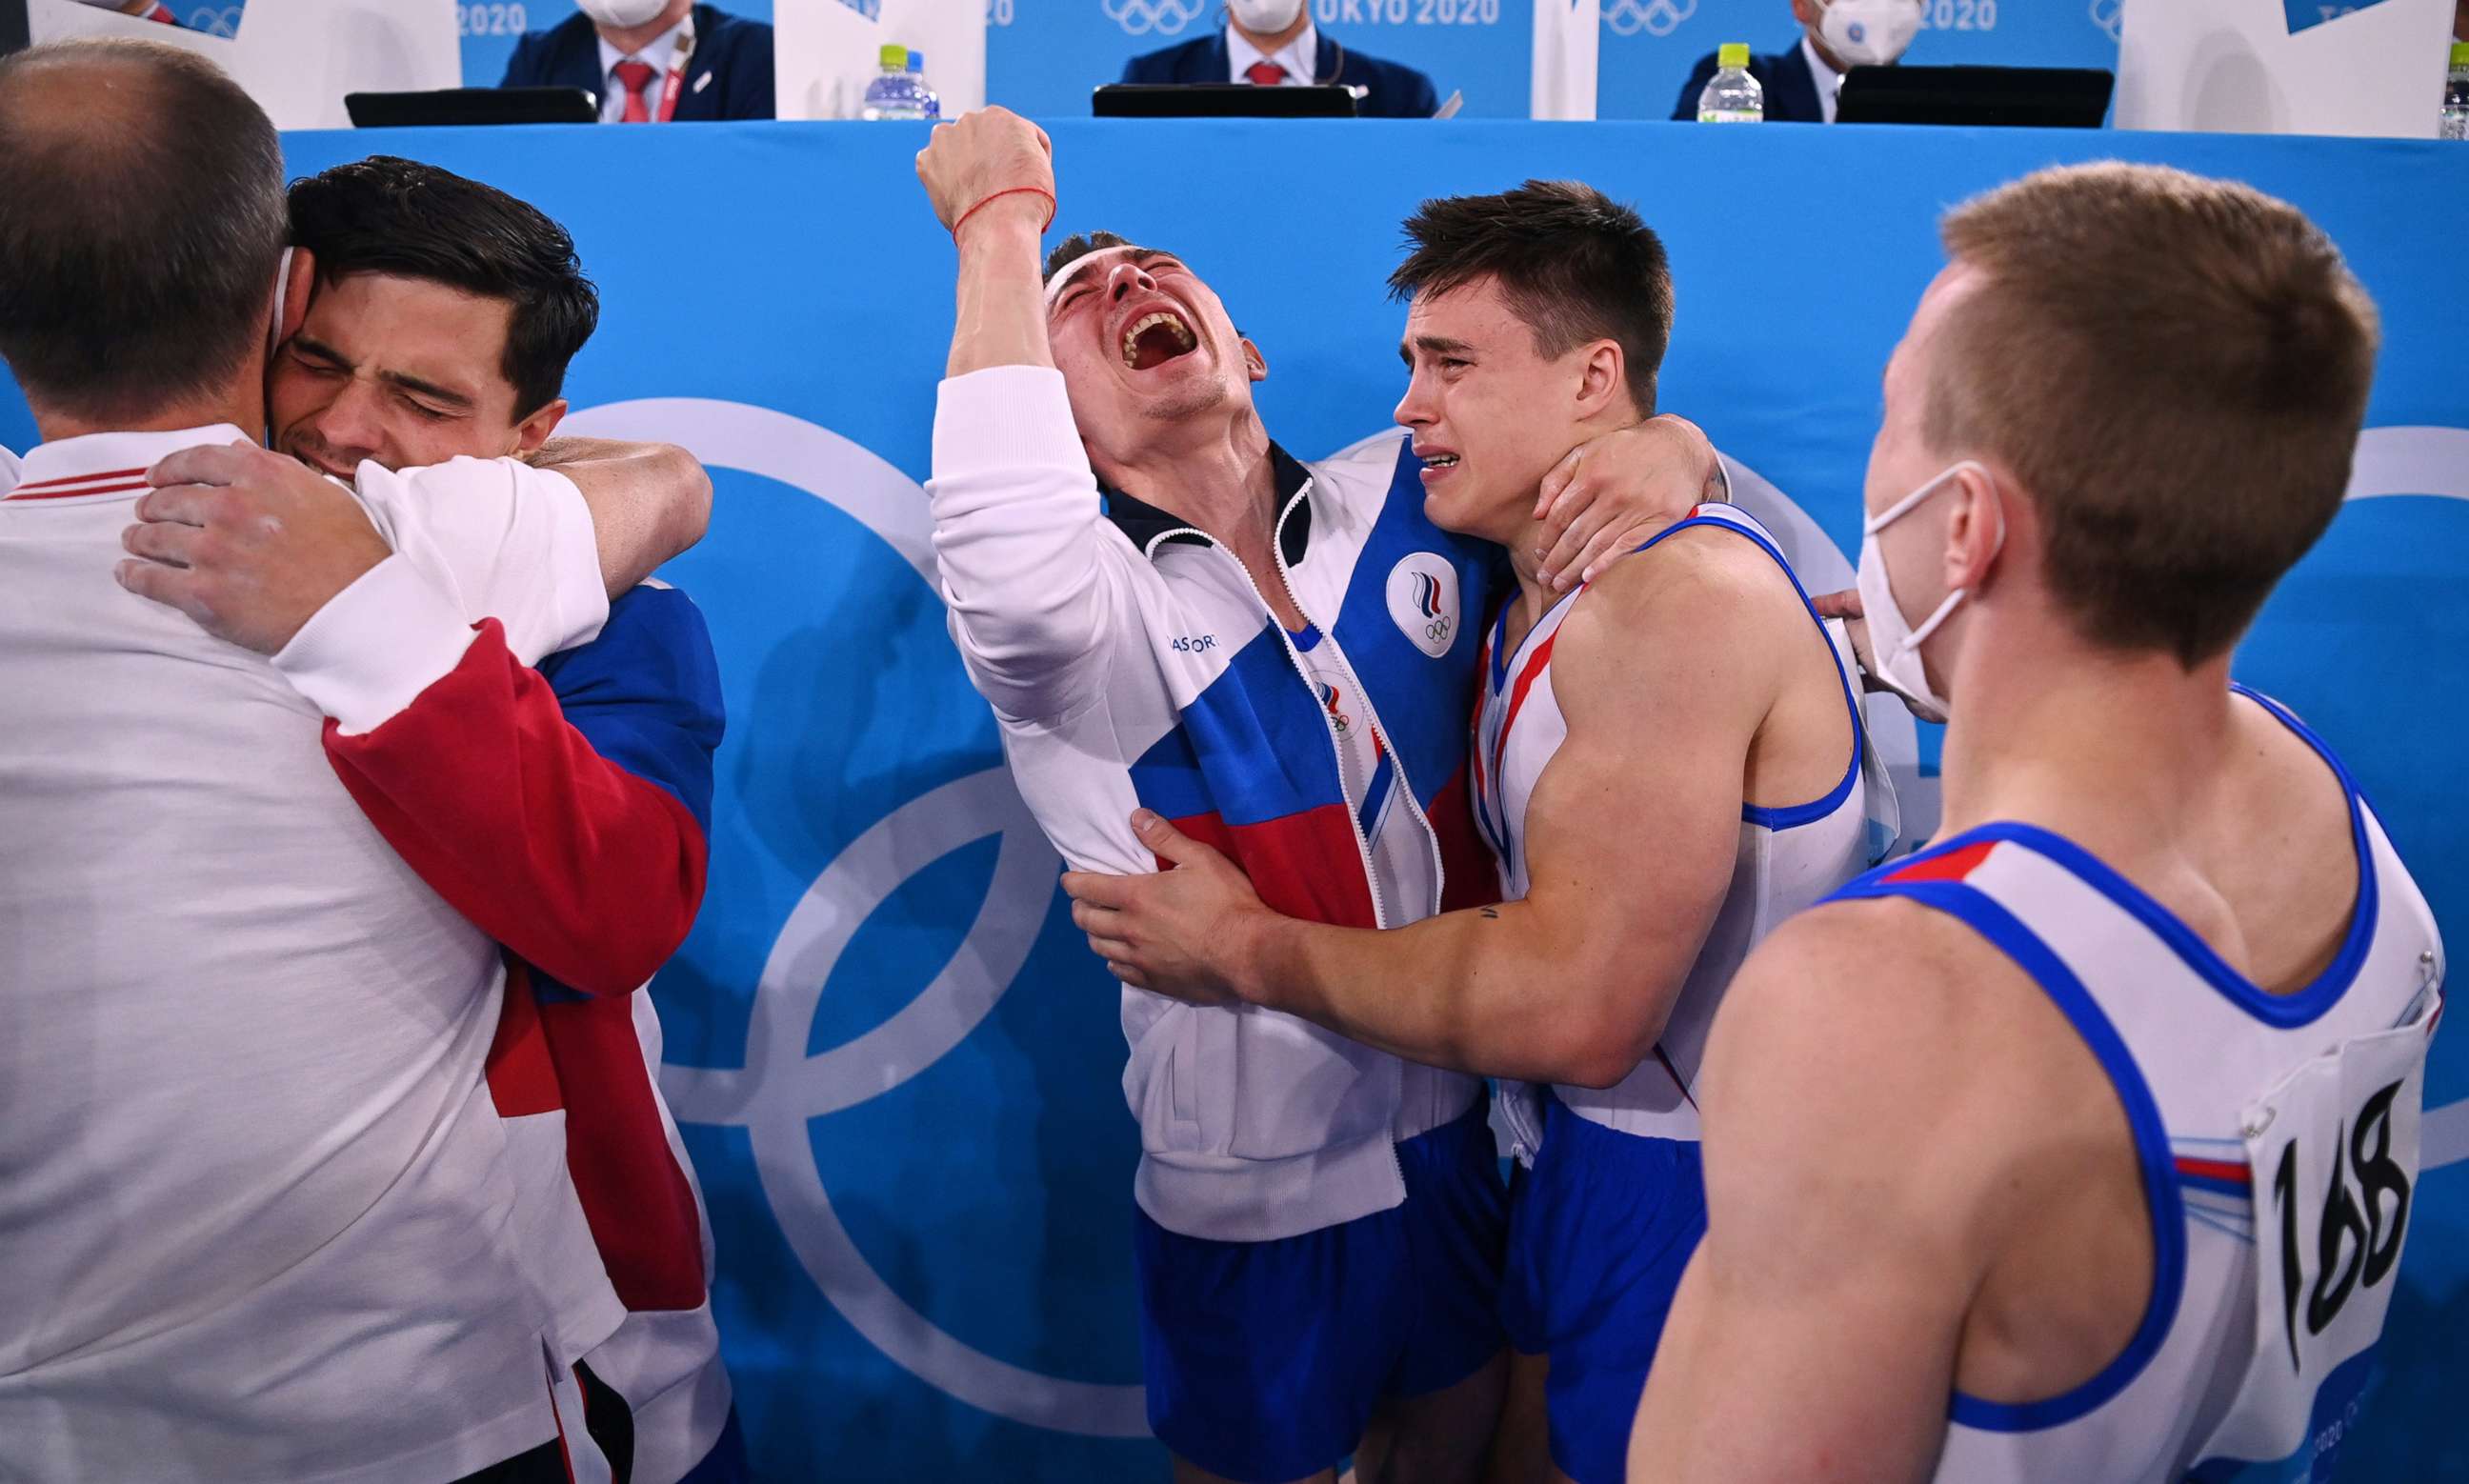 PHOTO: Members of the Russian men's gymnastics team celebrate winning the gold medal at the Tokyo Olympic Games, July 26, 2021, at the Ariake Gymnastics Centre in Tokyo.